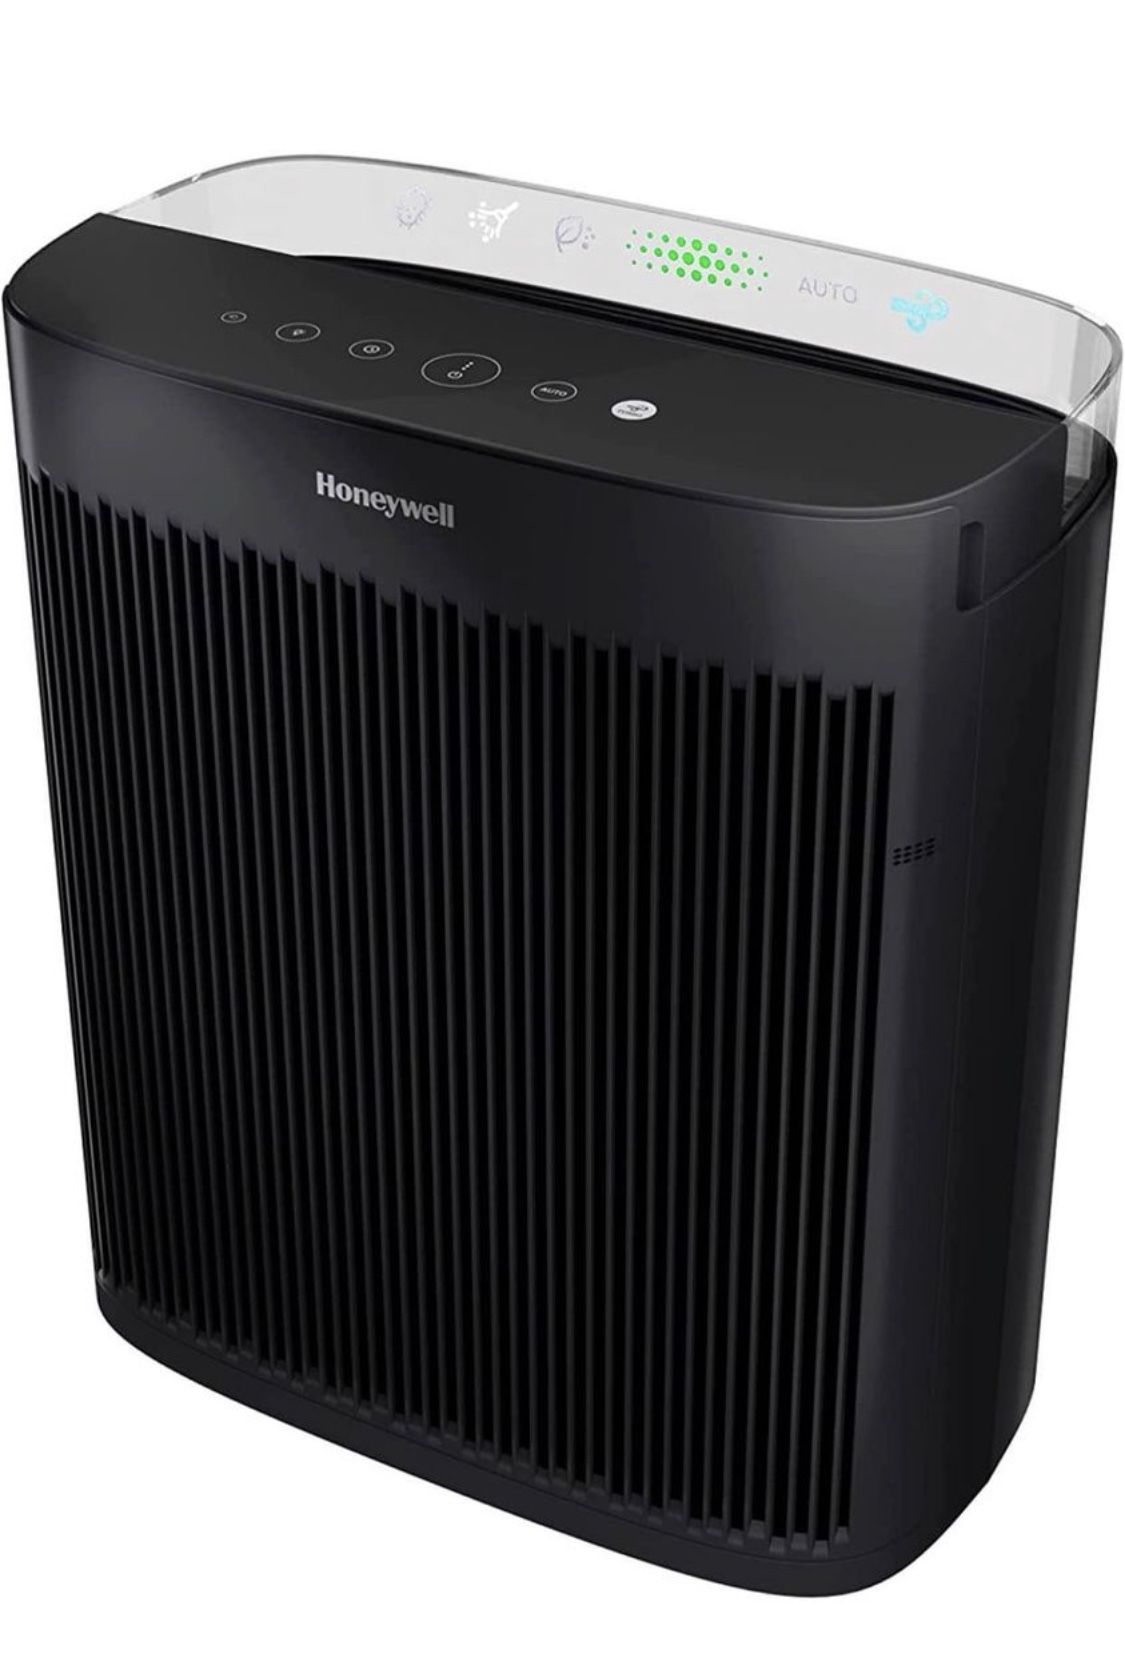 Honeywell HPA5300 InSight HEPA Air Purifier with Air Quality Indicator and Auto